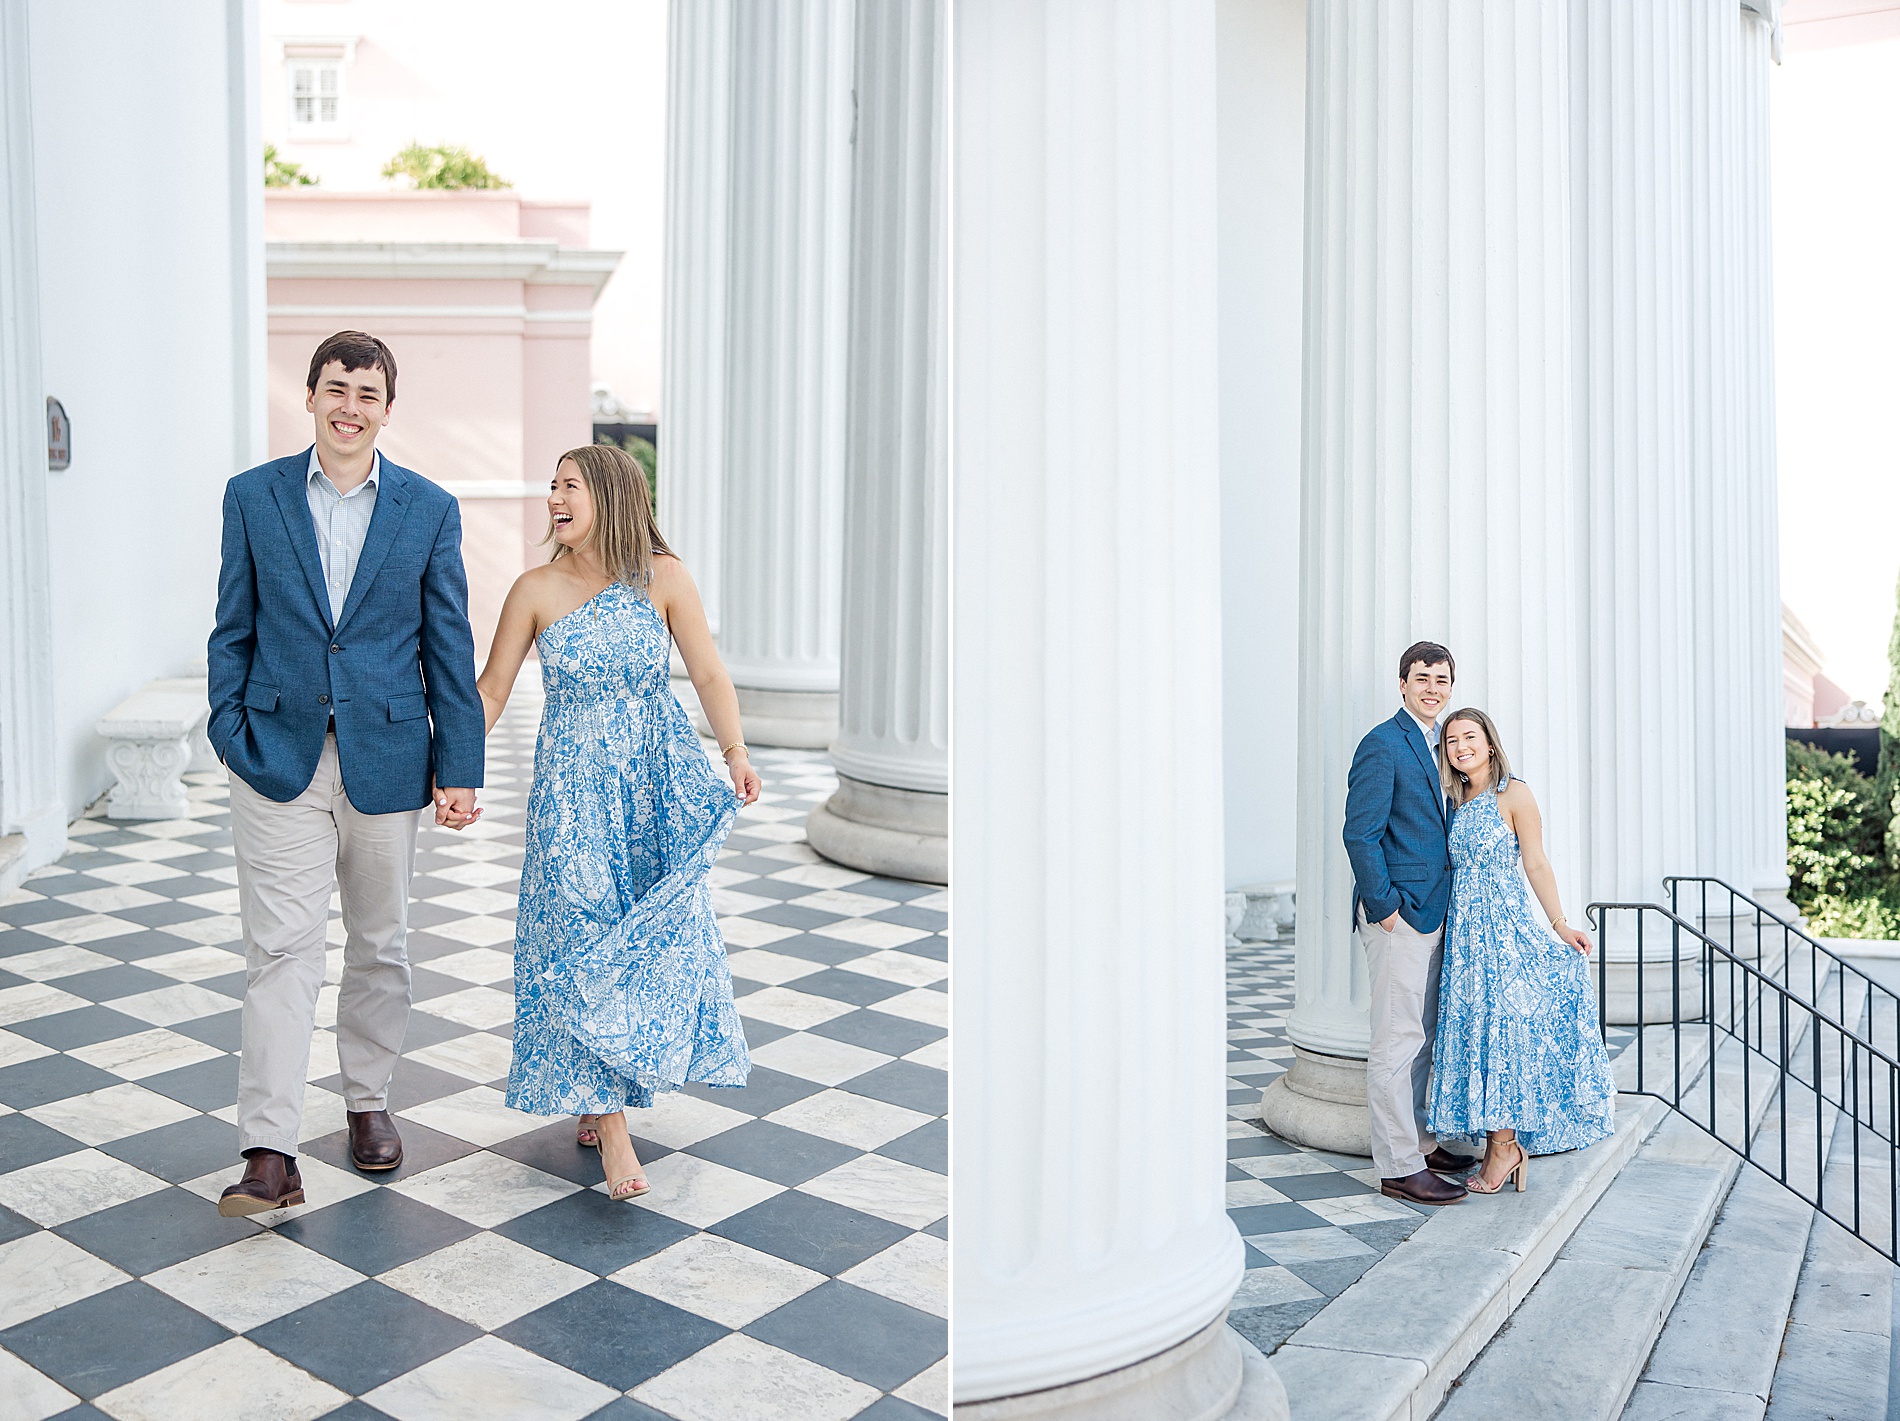 Charleston SC Engagement Photographer Karen Schanely captures couple as they walk through historic building in Downtown Charleston